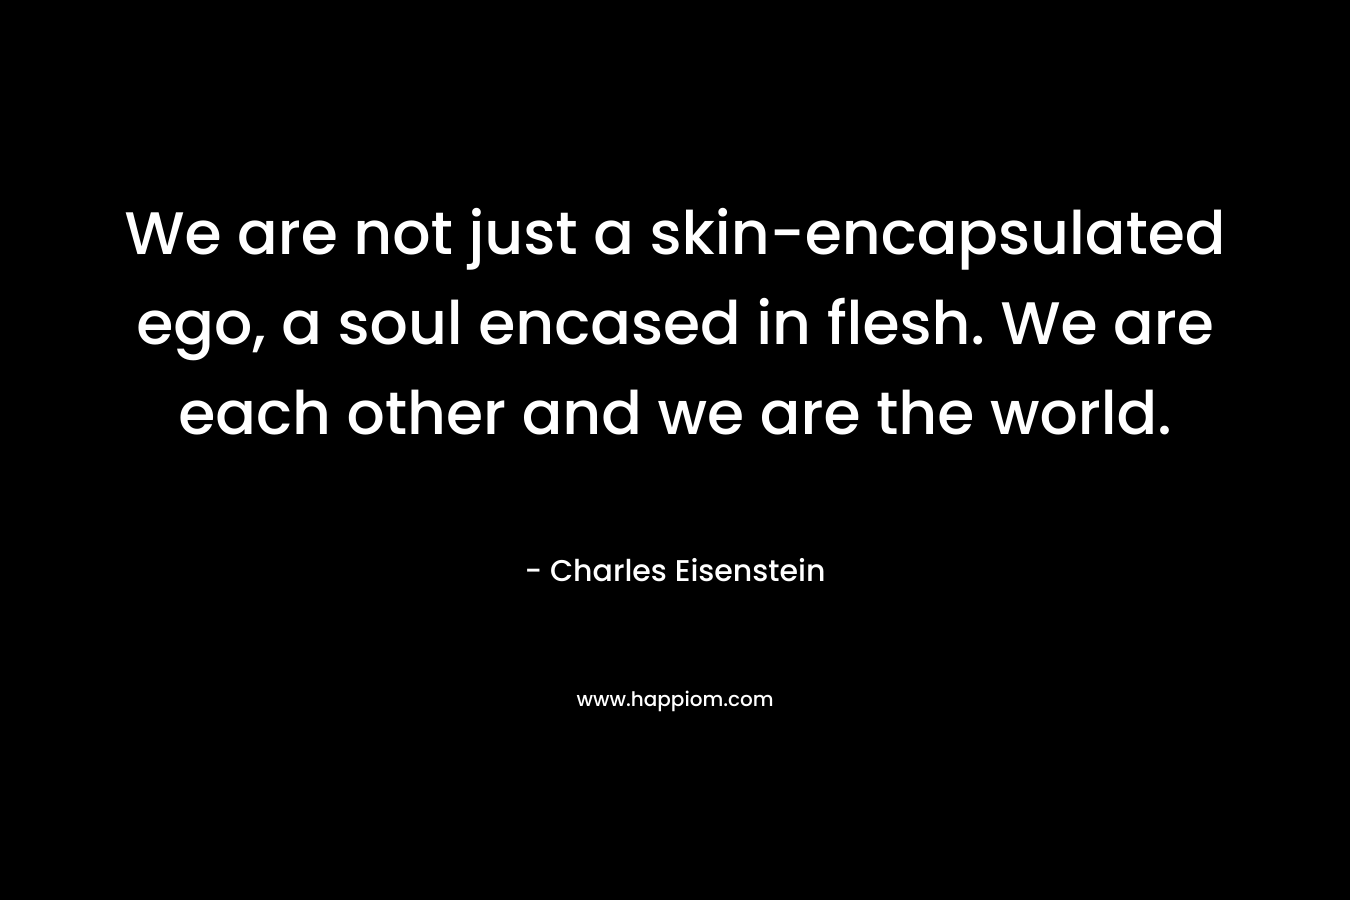 We are not just a skin-encapsulated ego, a soul encased in flesh. We are each other and we are the world. – Charles Eisenstein